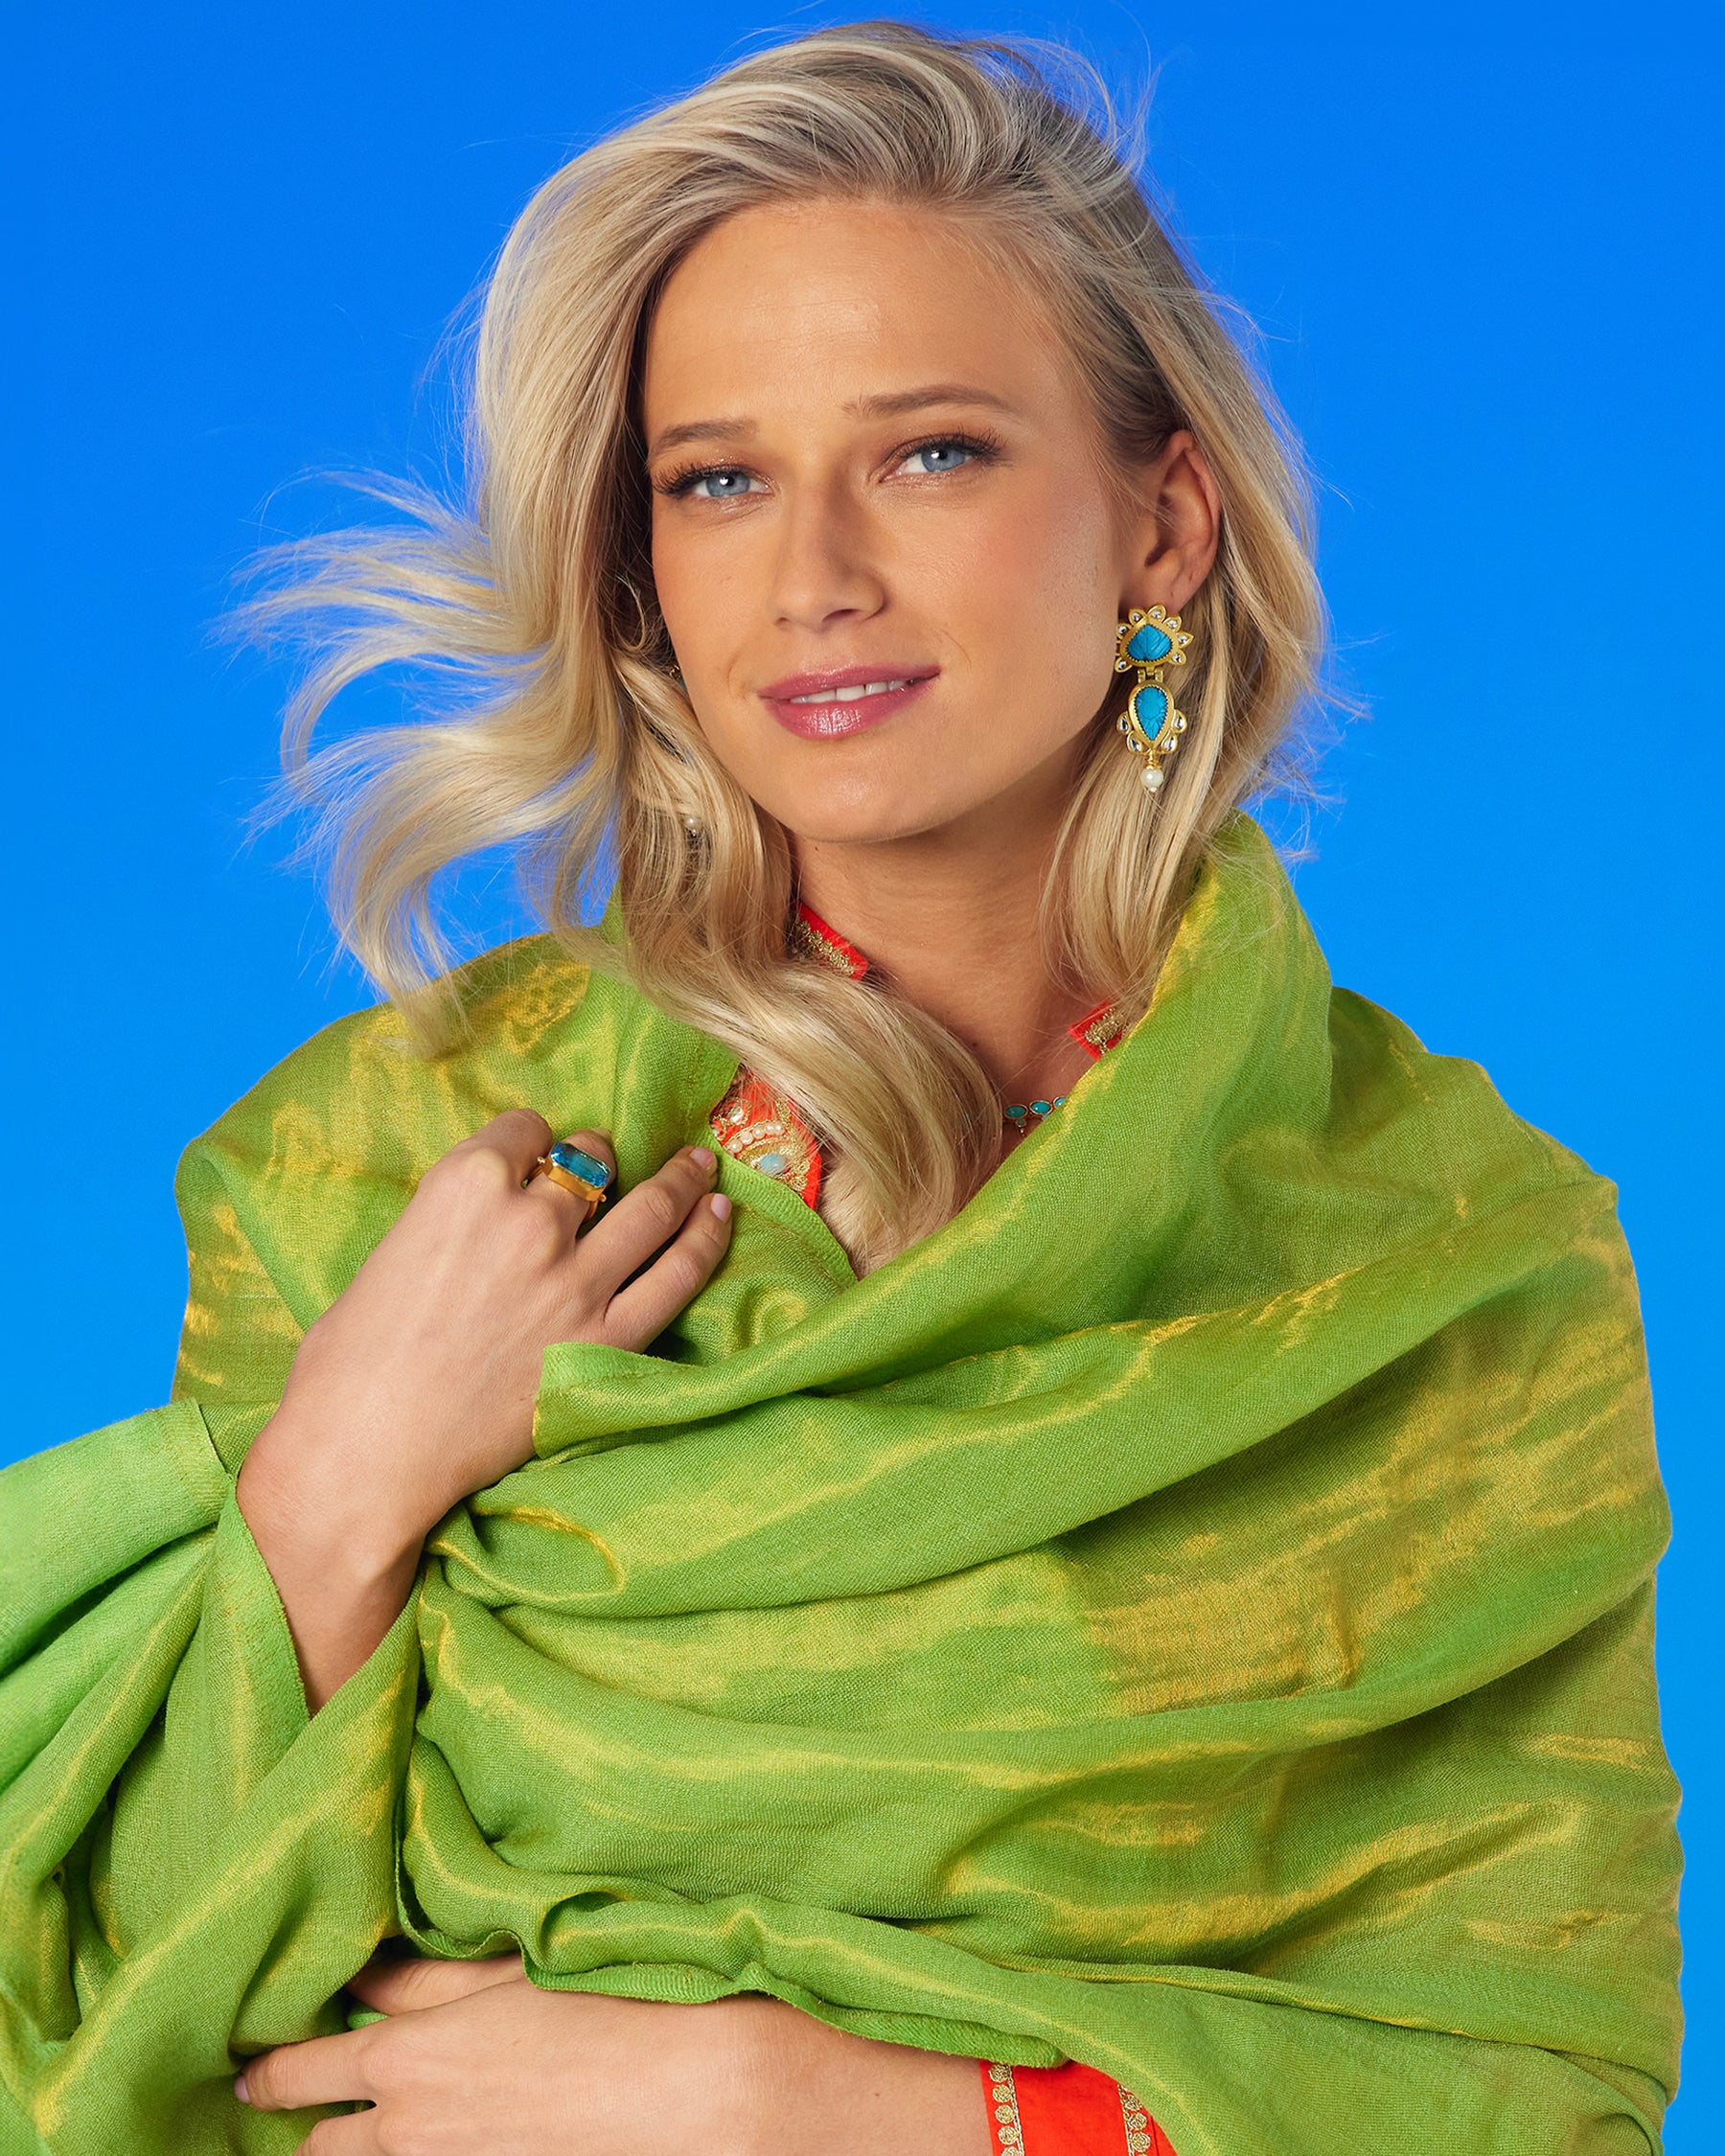 Josephine Reversible Pashmina Shawl in Gold Shimmer Lime wrapped in a cocoon to show the shimmery gold in the shawl